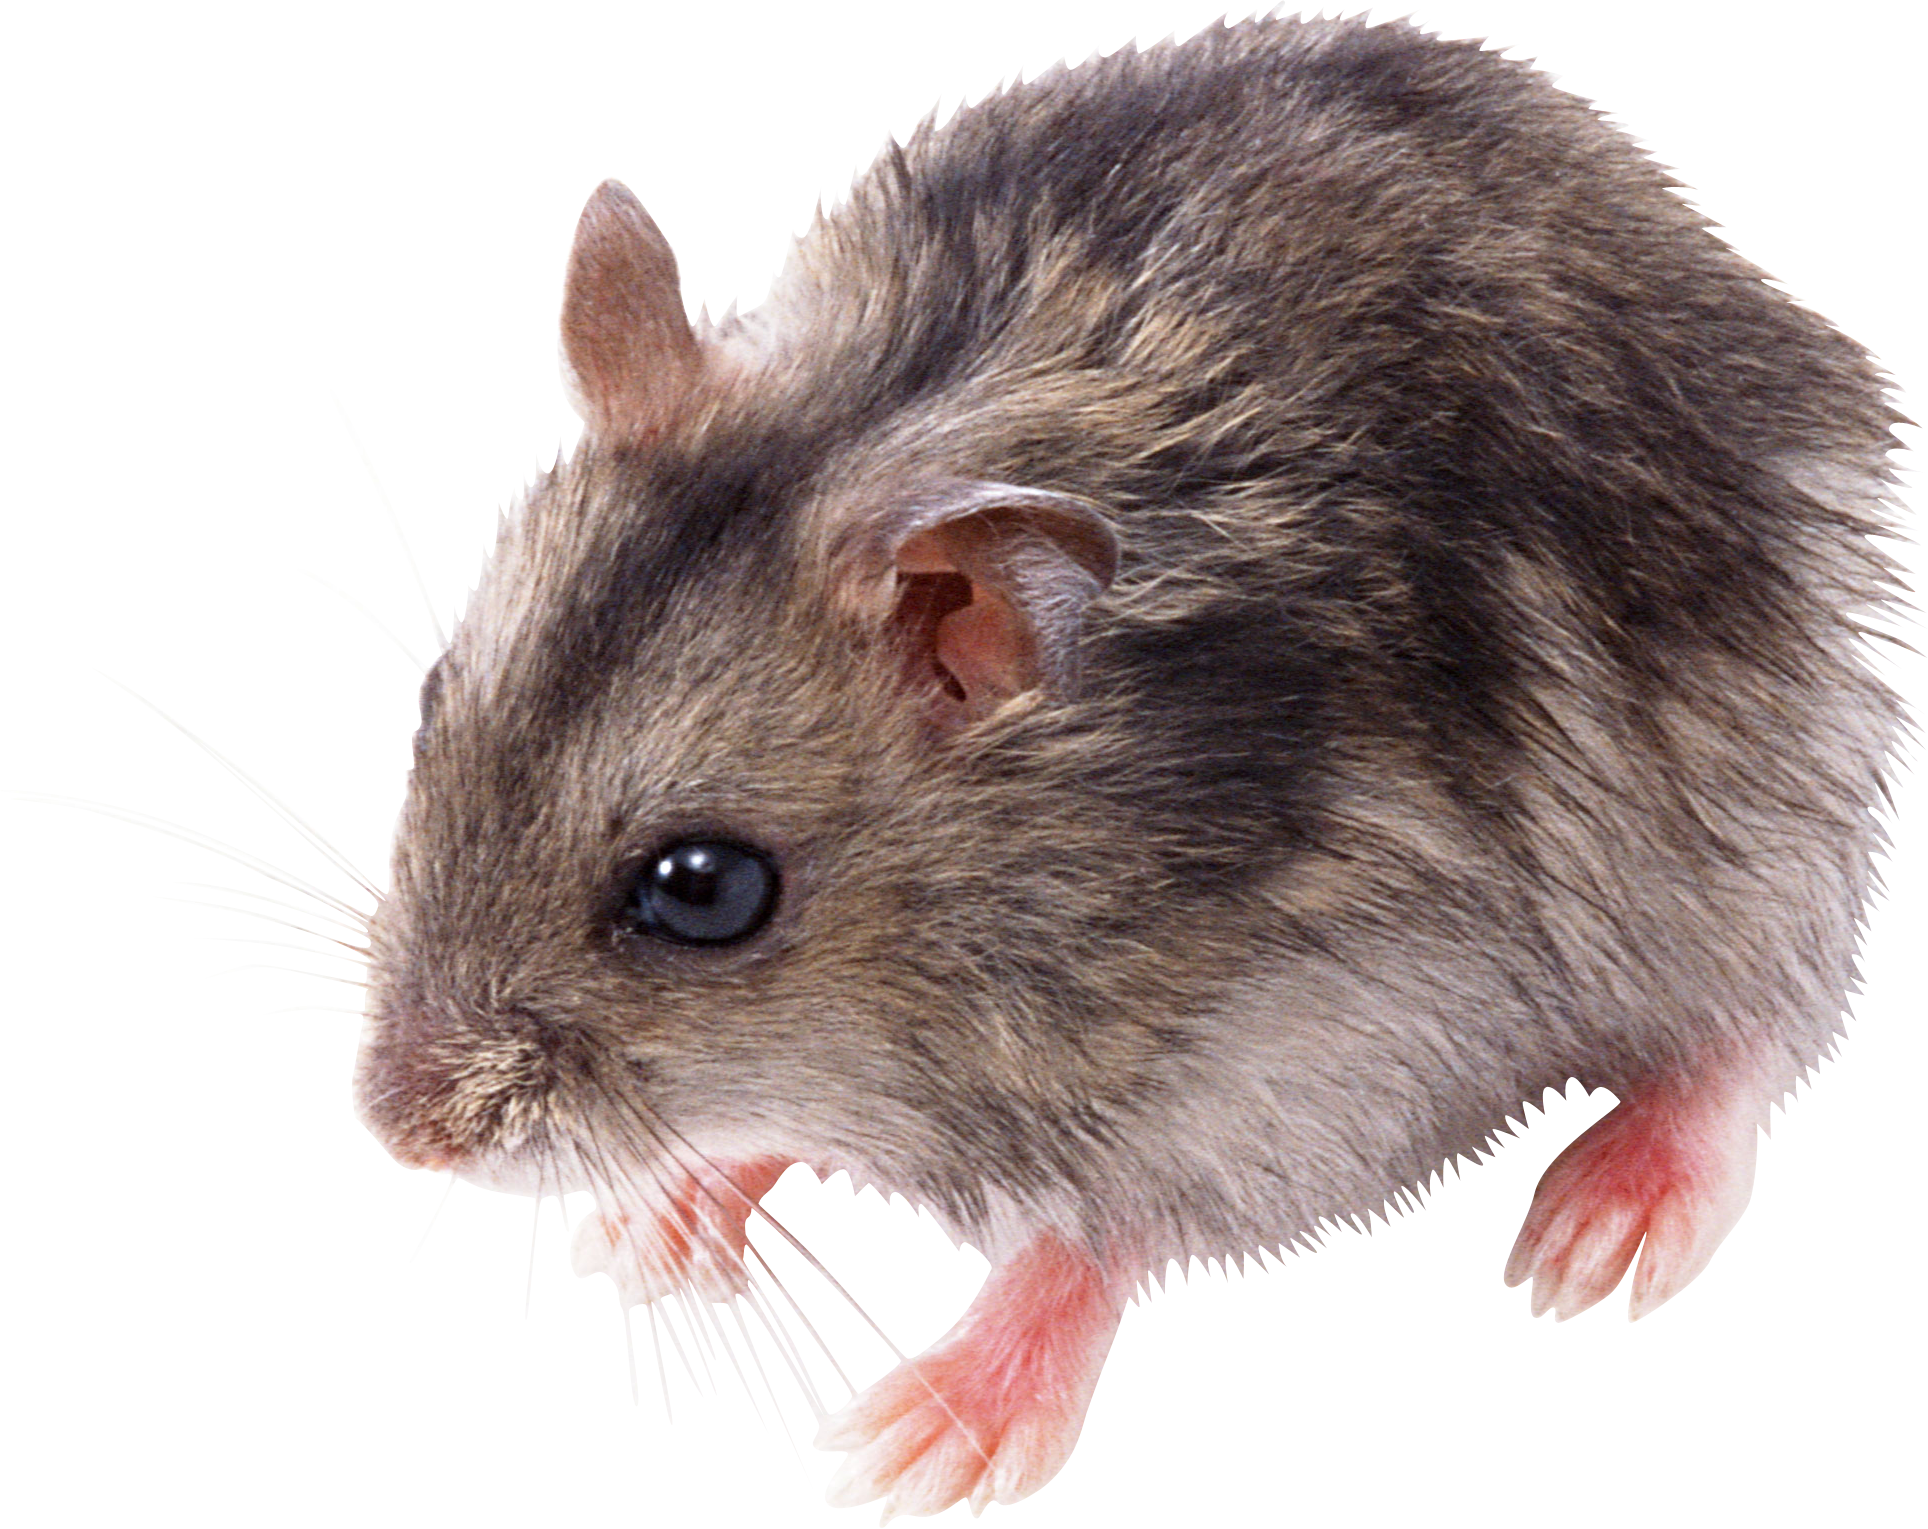 Pc Mouse Png Hd PNG Image